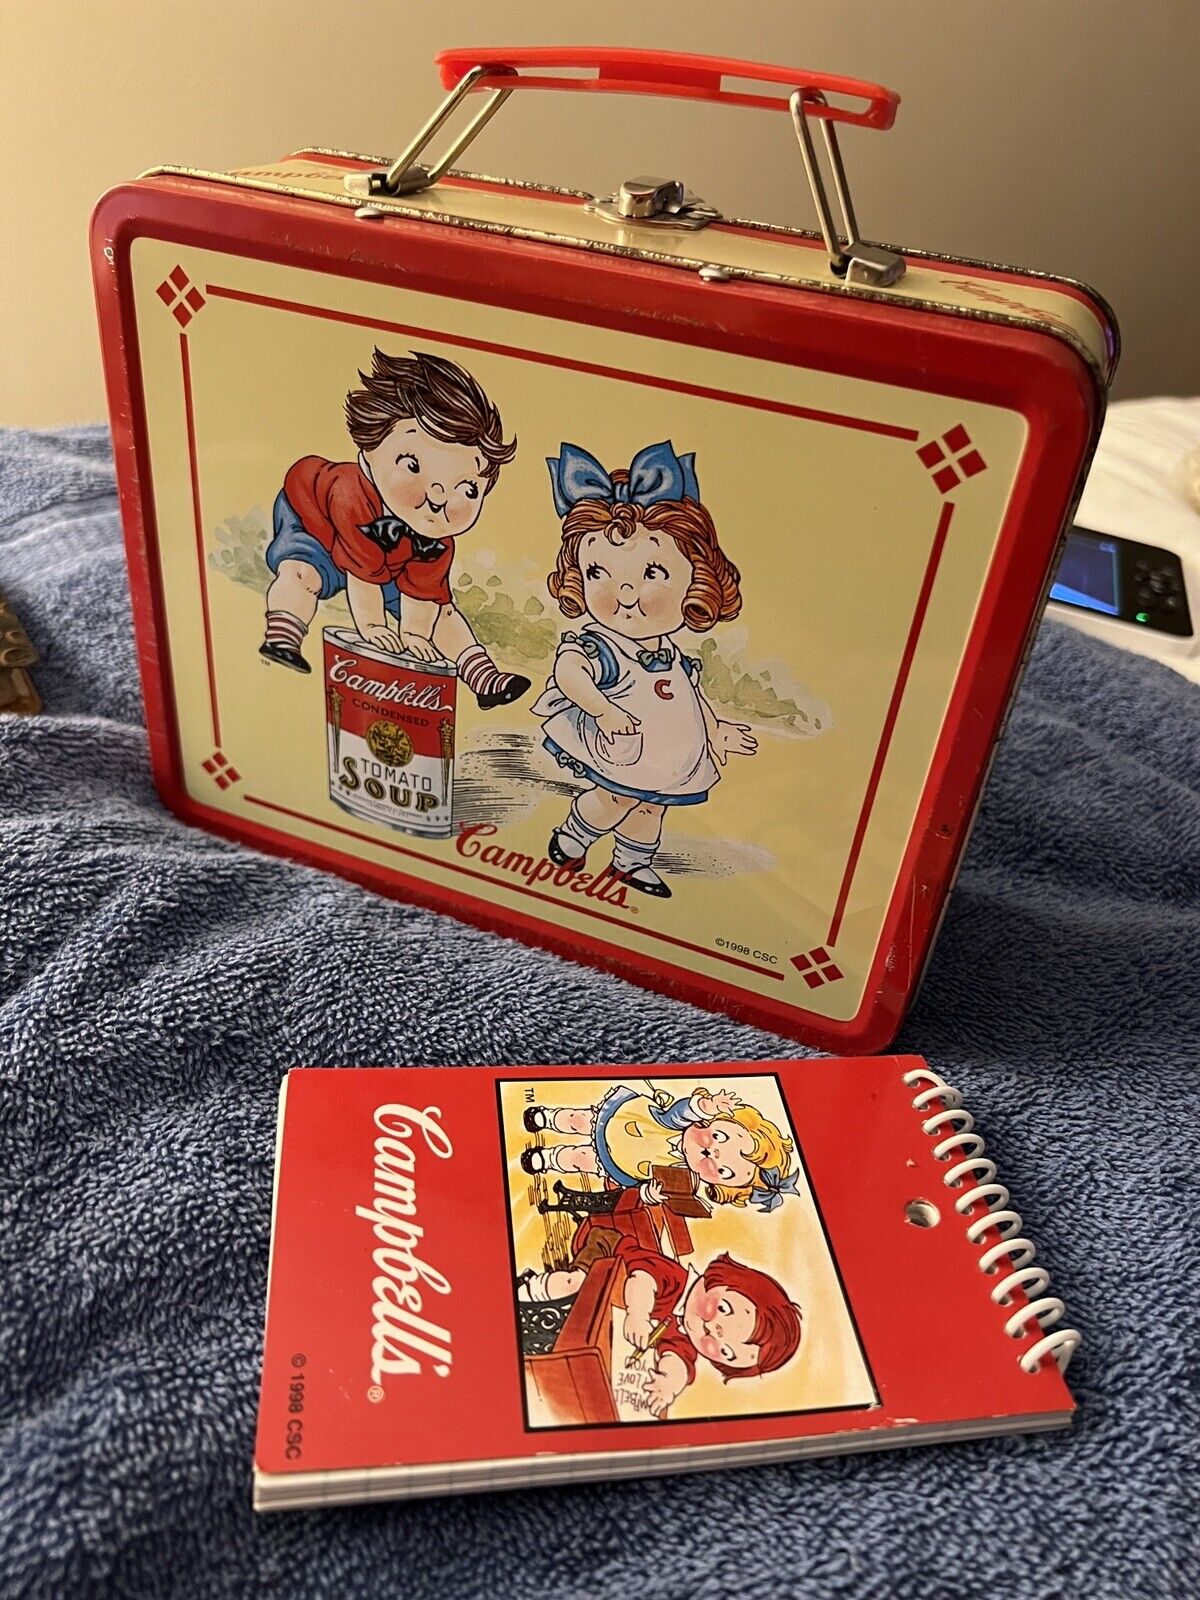 Vintage Campbells Tomato Soup 1998 Collectible Red Metal Lunch Box & New Notepad